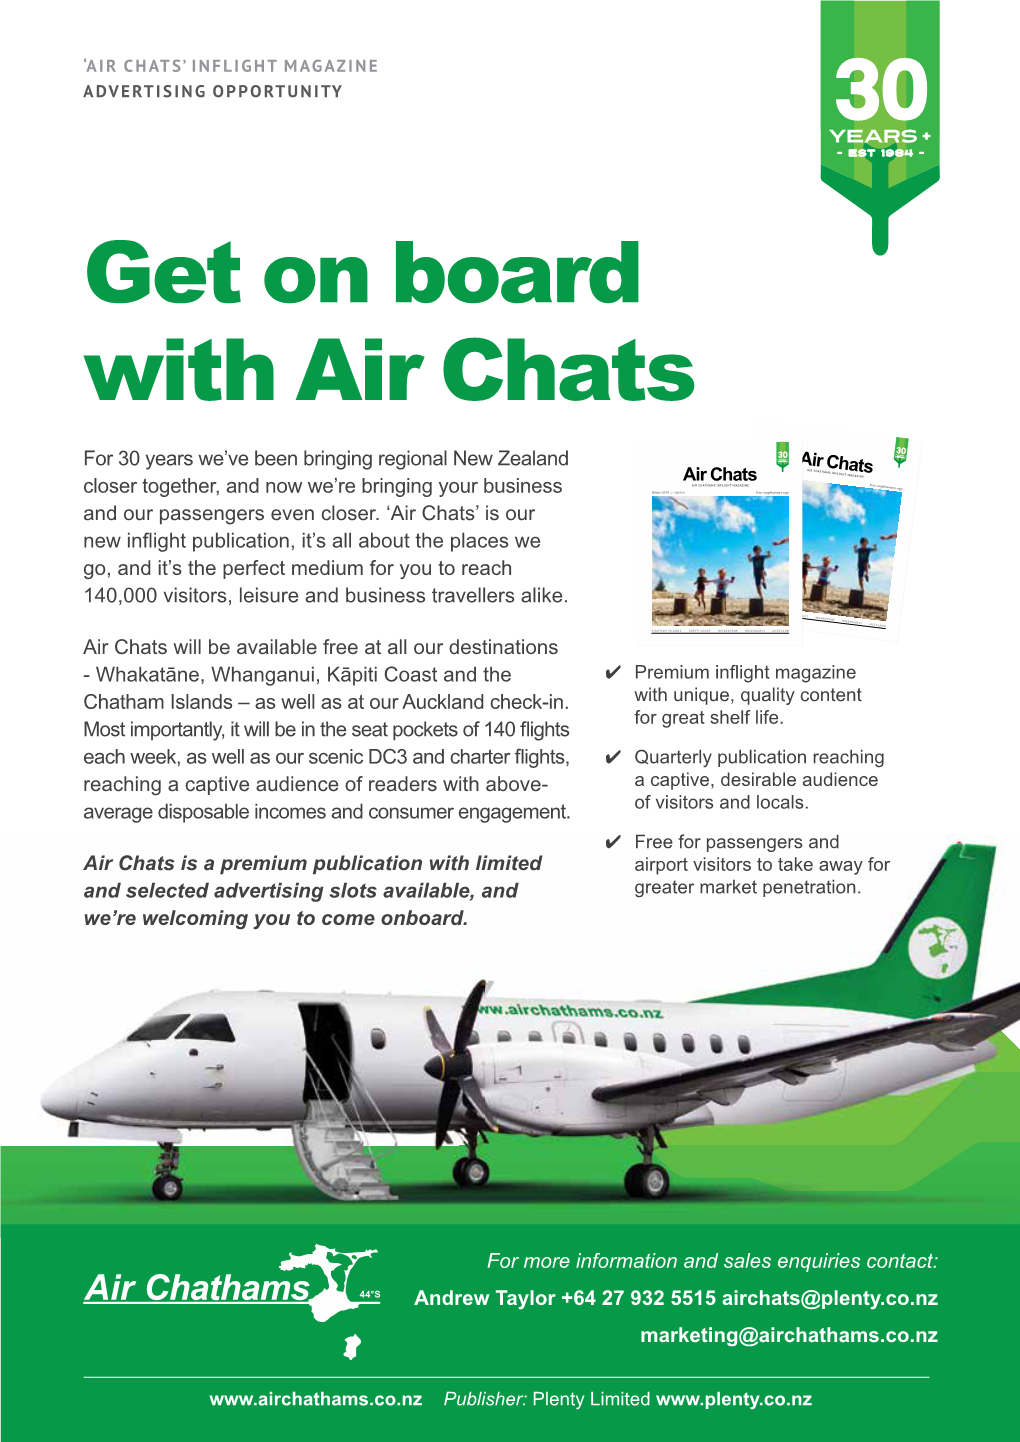 Get on Board with Air Chats